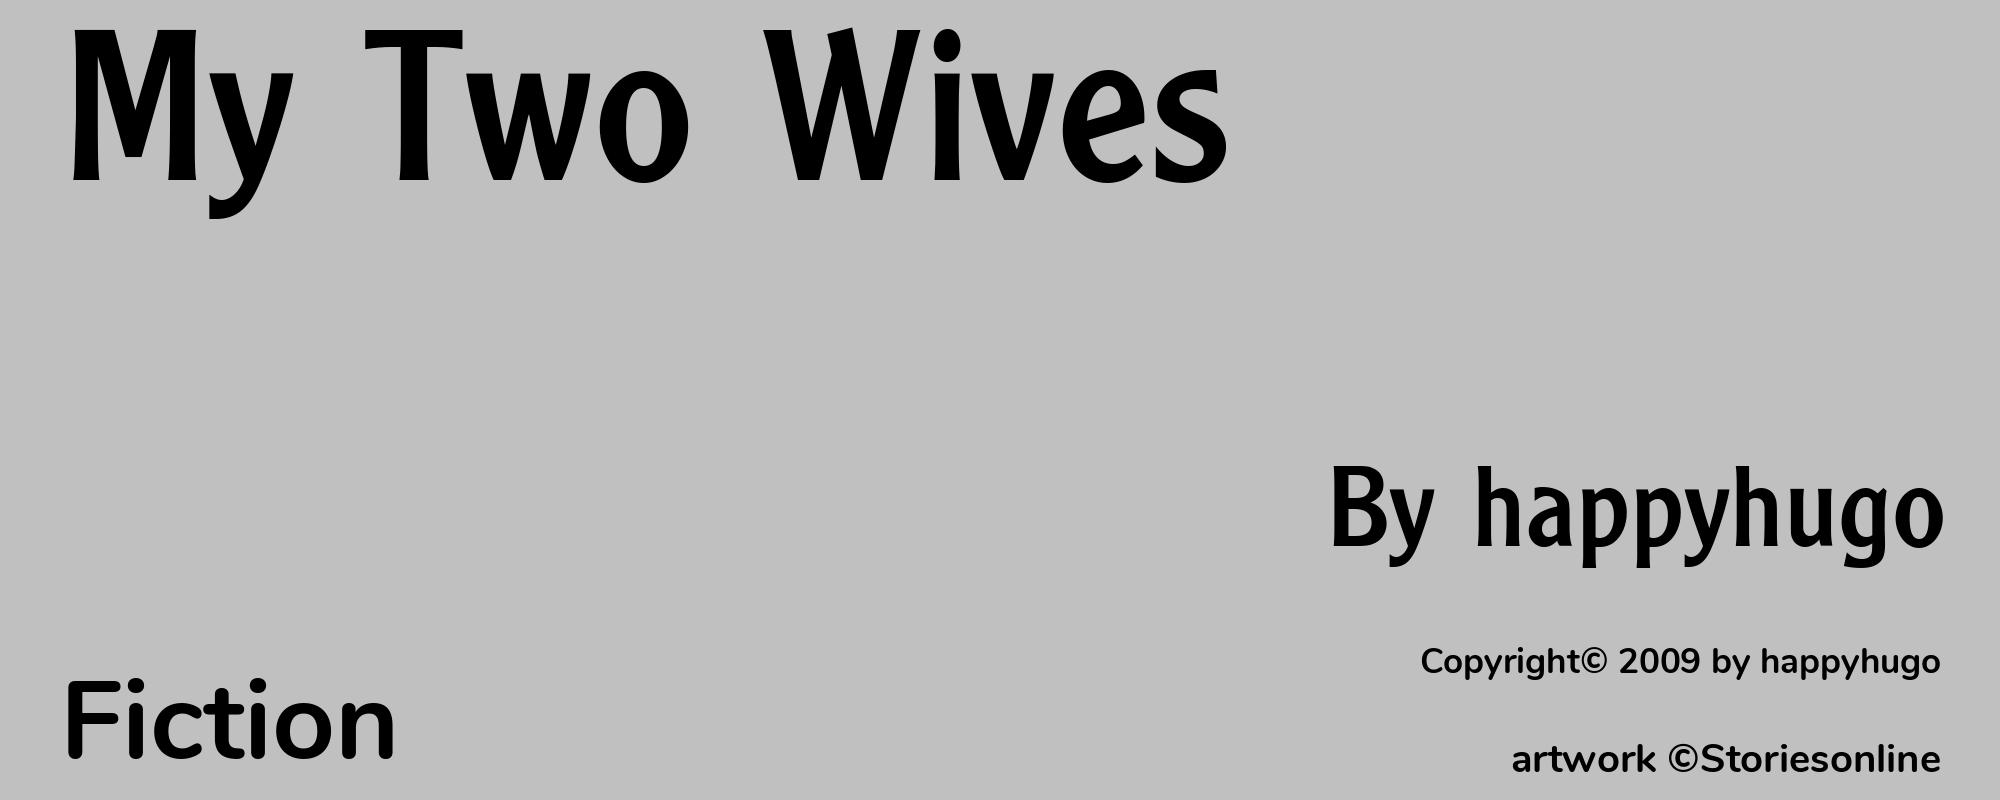 My Two Wives - Cover